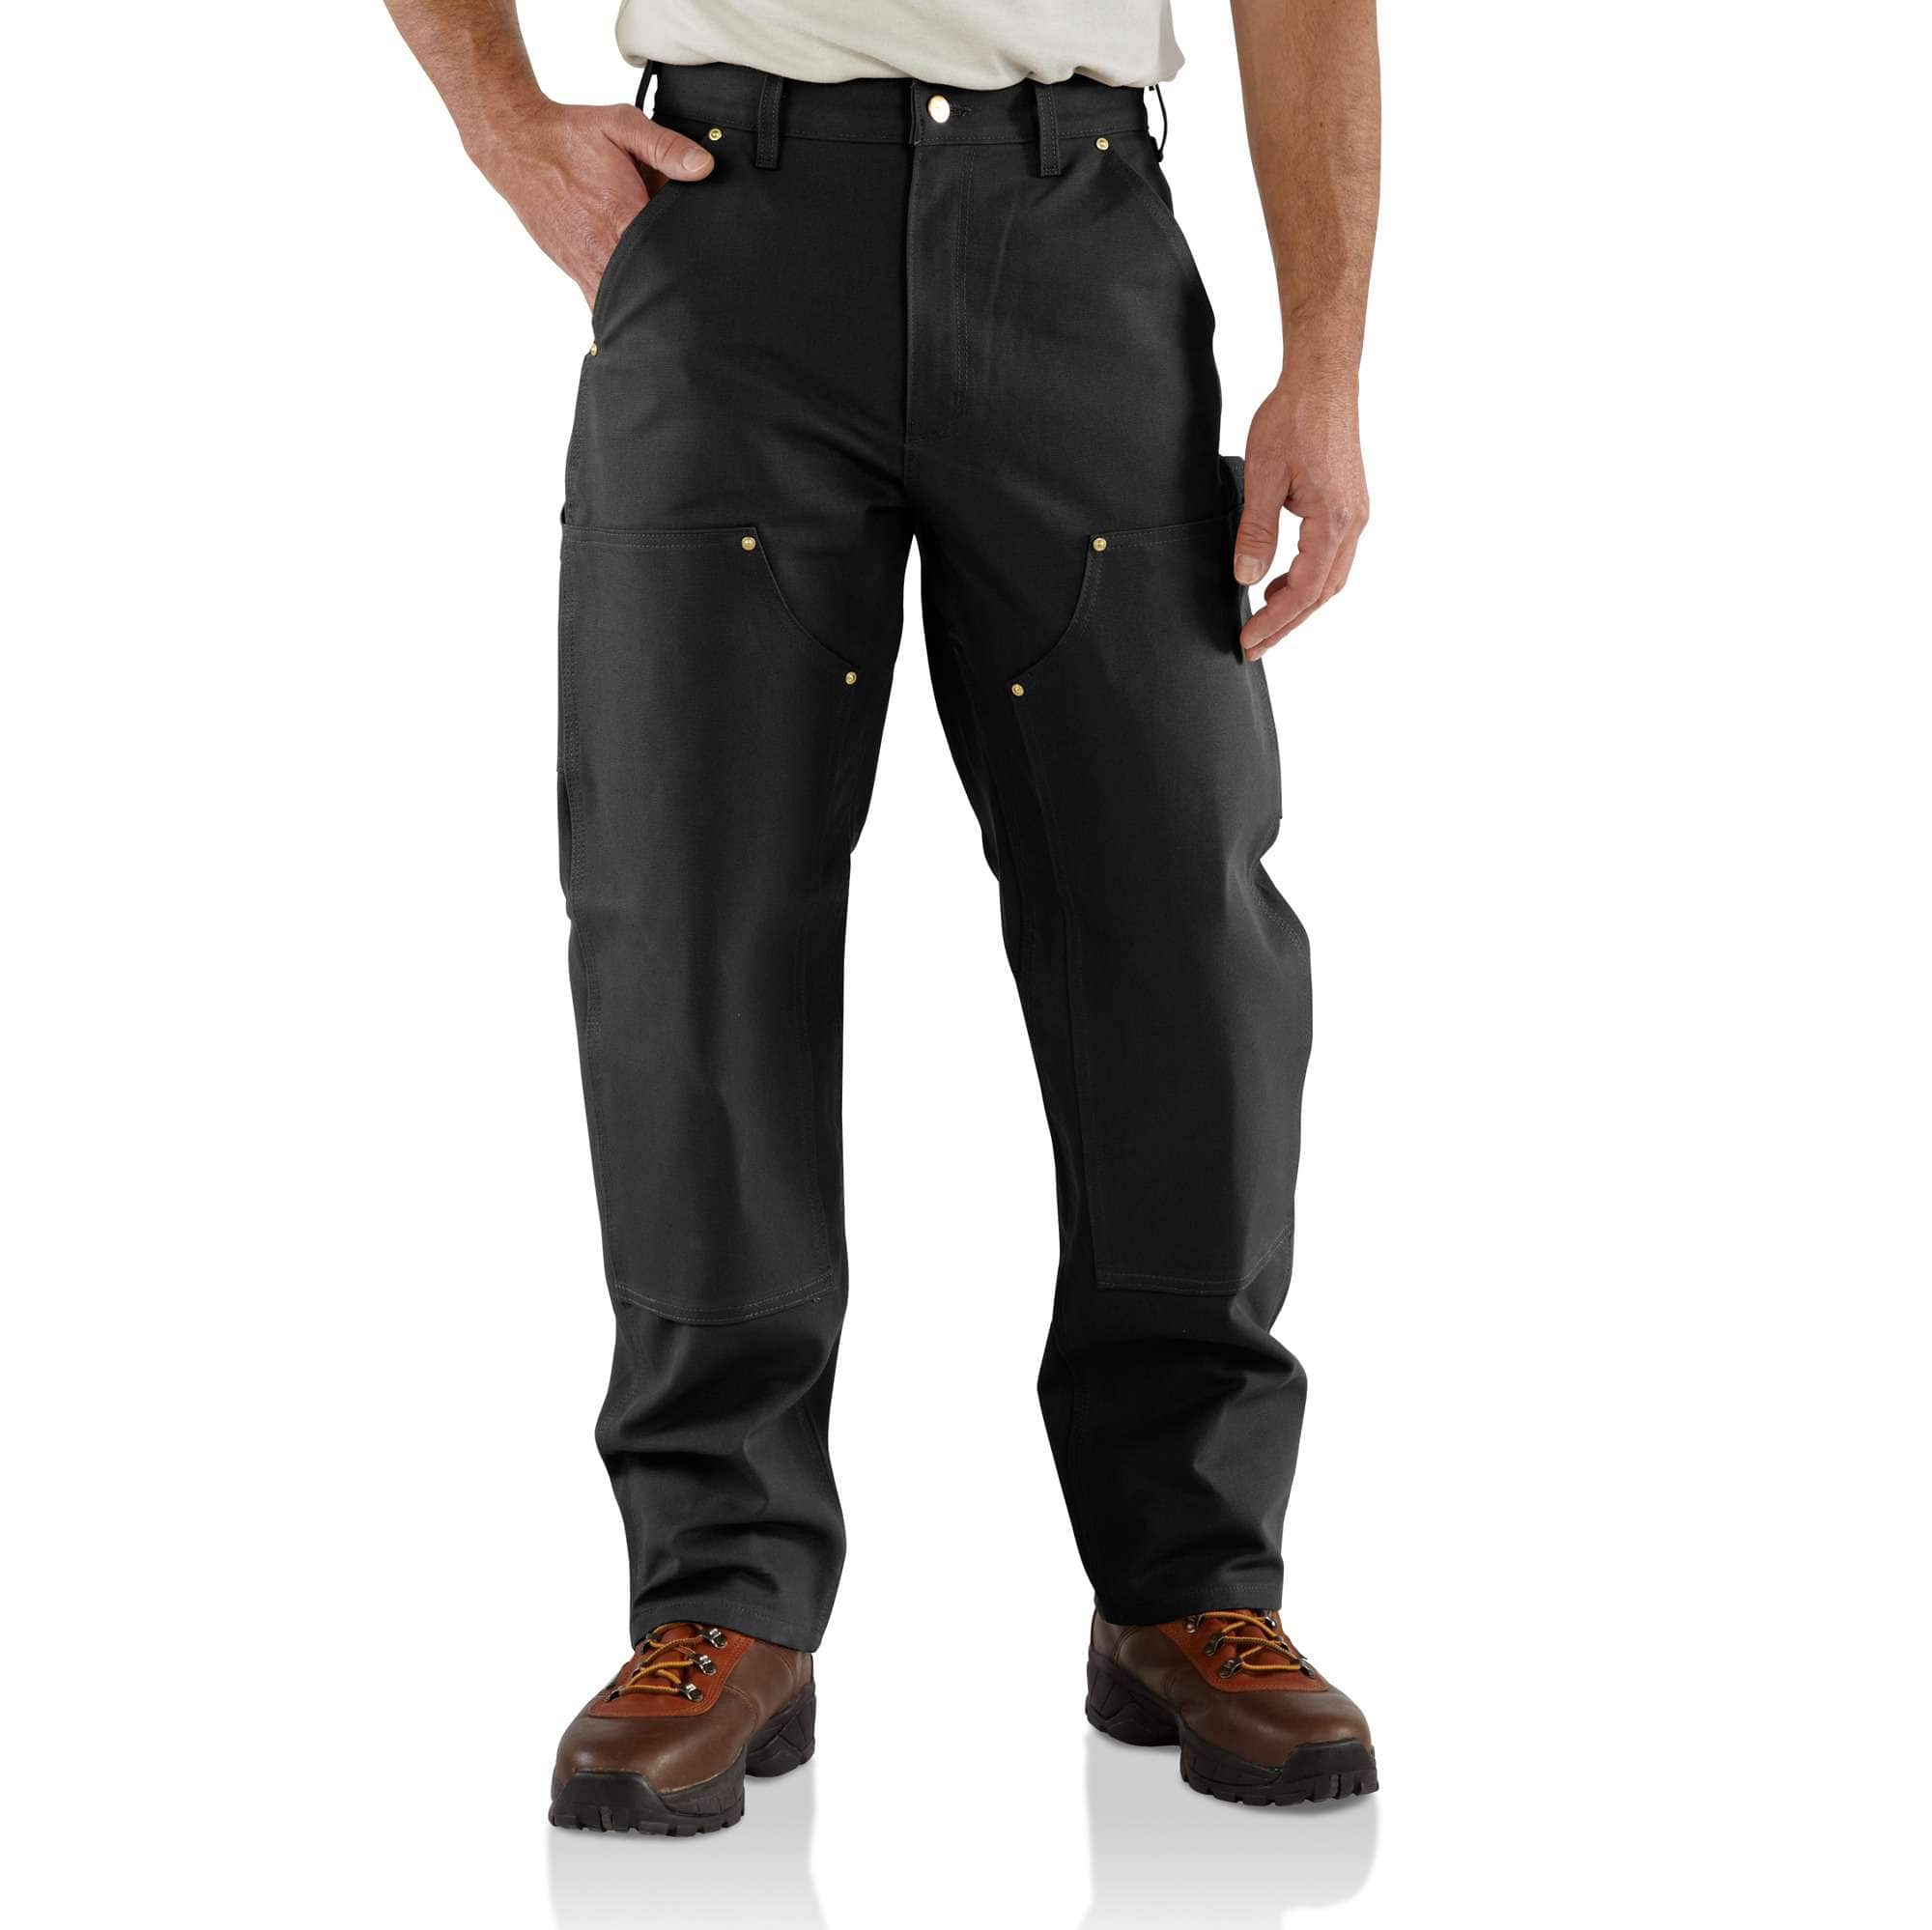 LOOSE FIT FIRM DUCK DOUBLE-FRONT UTILITY WORK PANT